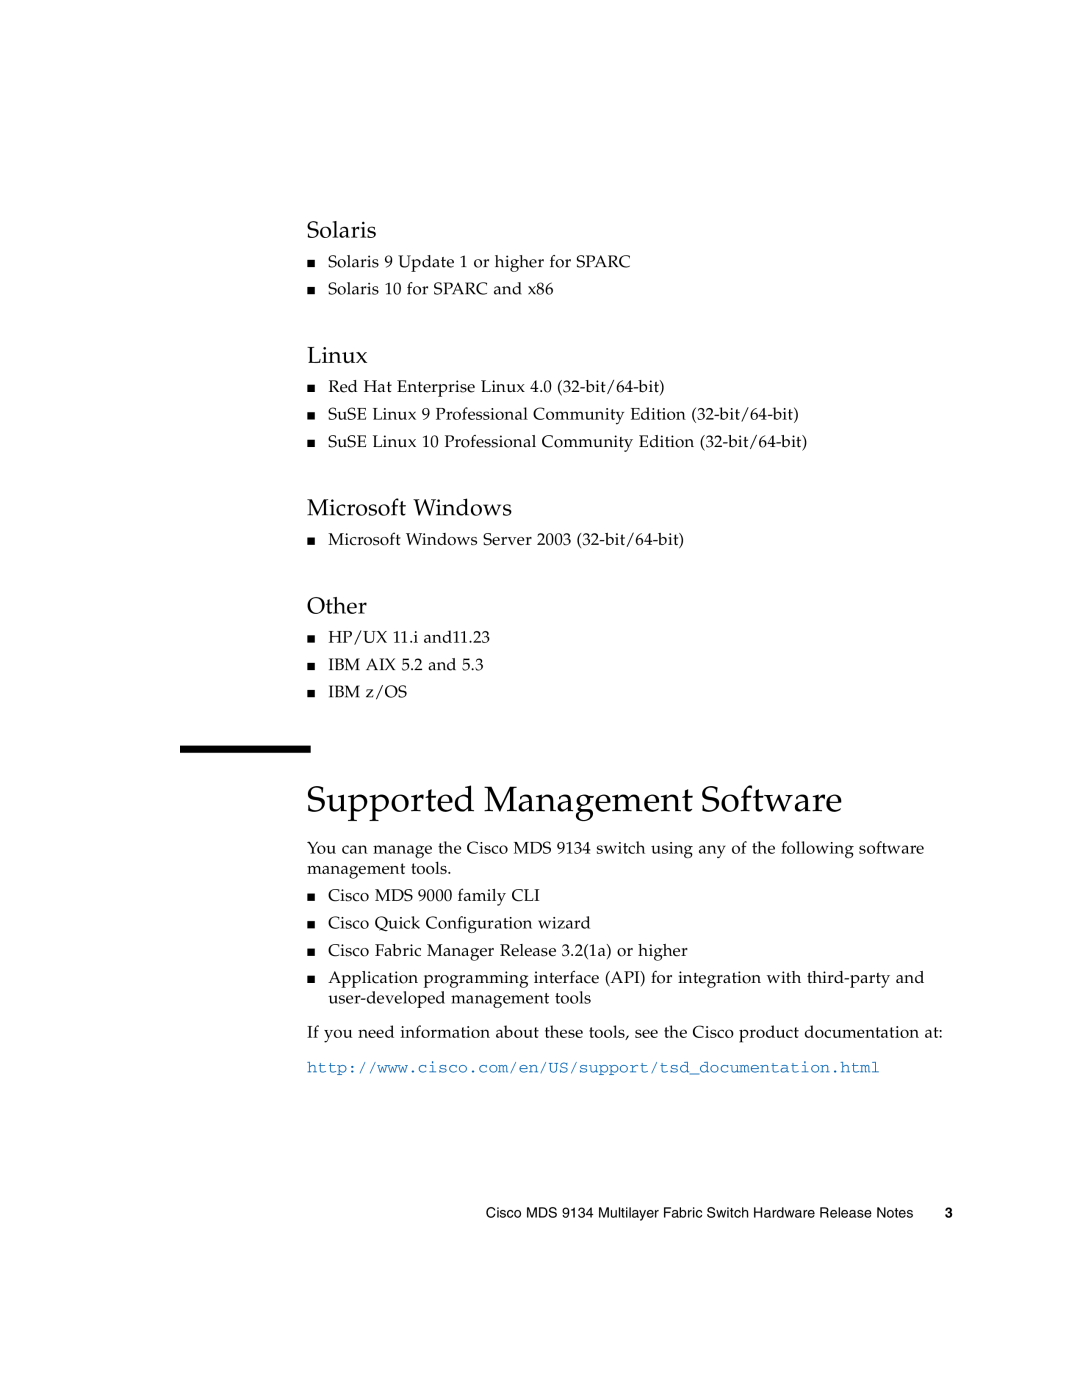 Sun Microsystems MDS 9134 manual Supported Management Software, Solaris, Linux, Microsoft Windows, Other 